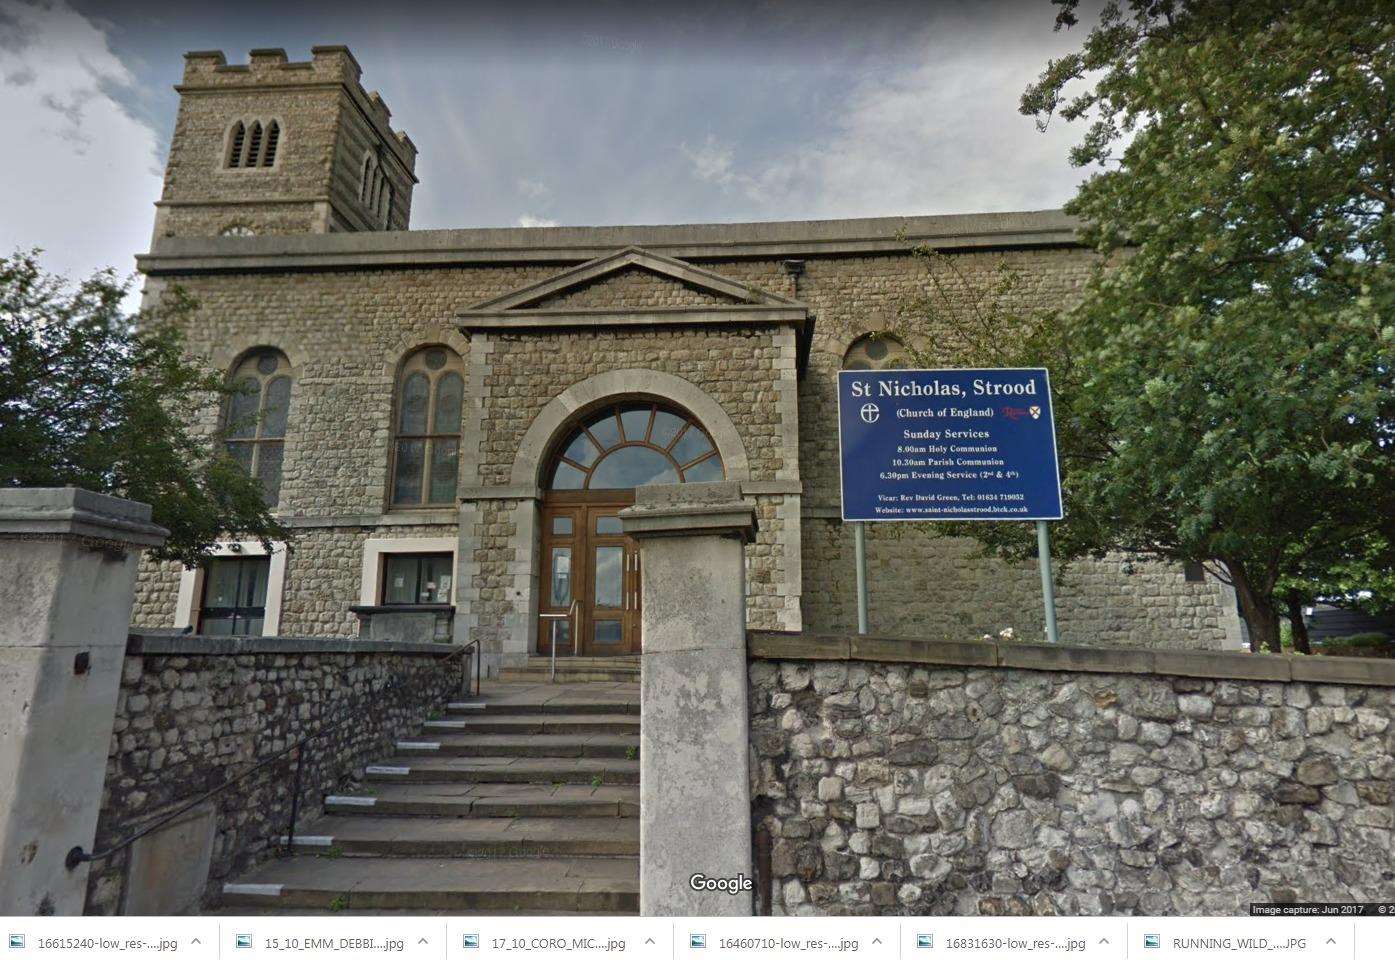 The incident happened near St Nicholas Church in Strood (5273736)